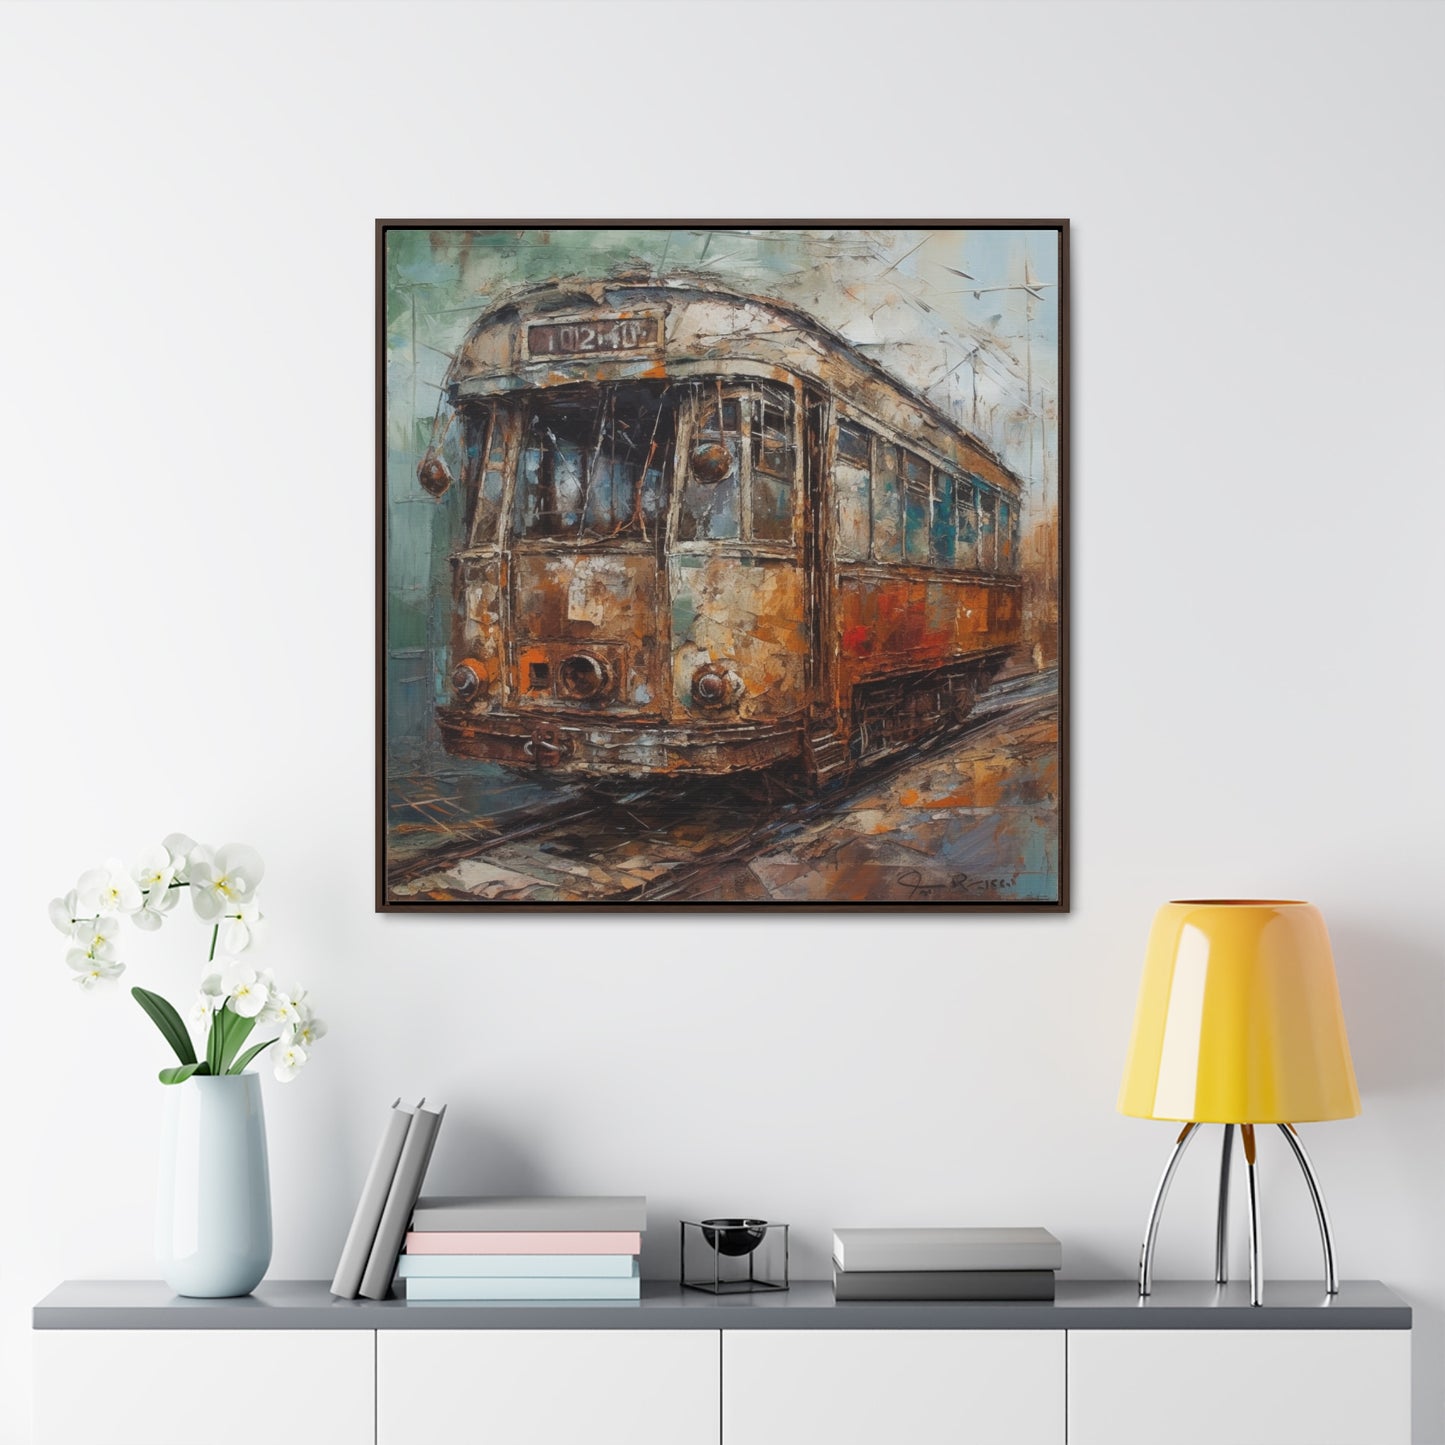 Urban 31, Gallery Canvas Wraps, Square Frame